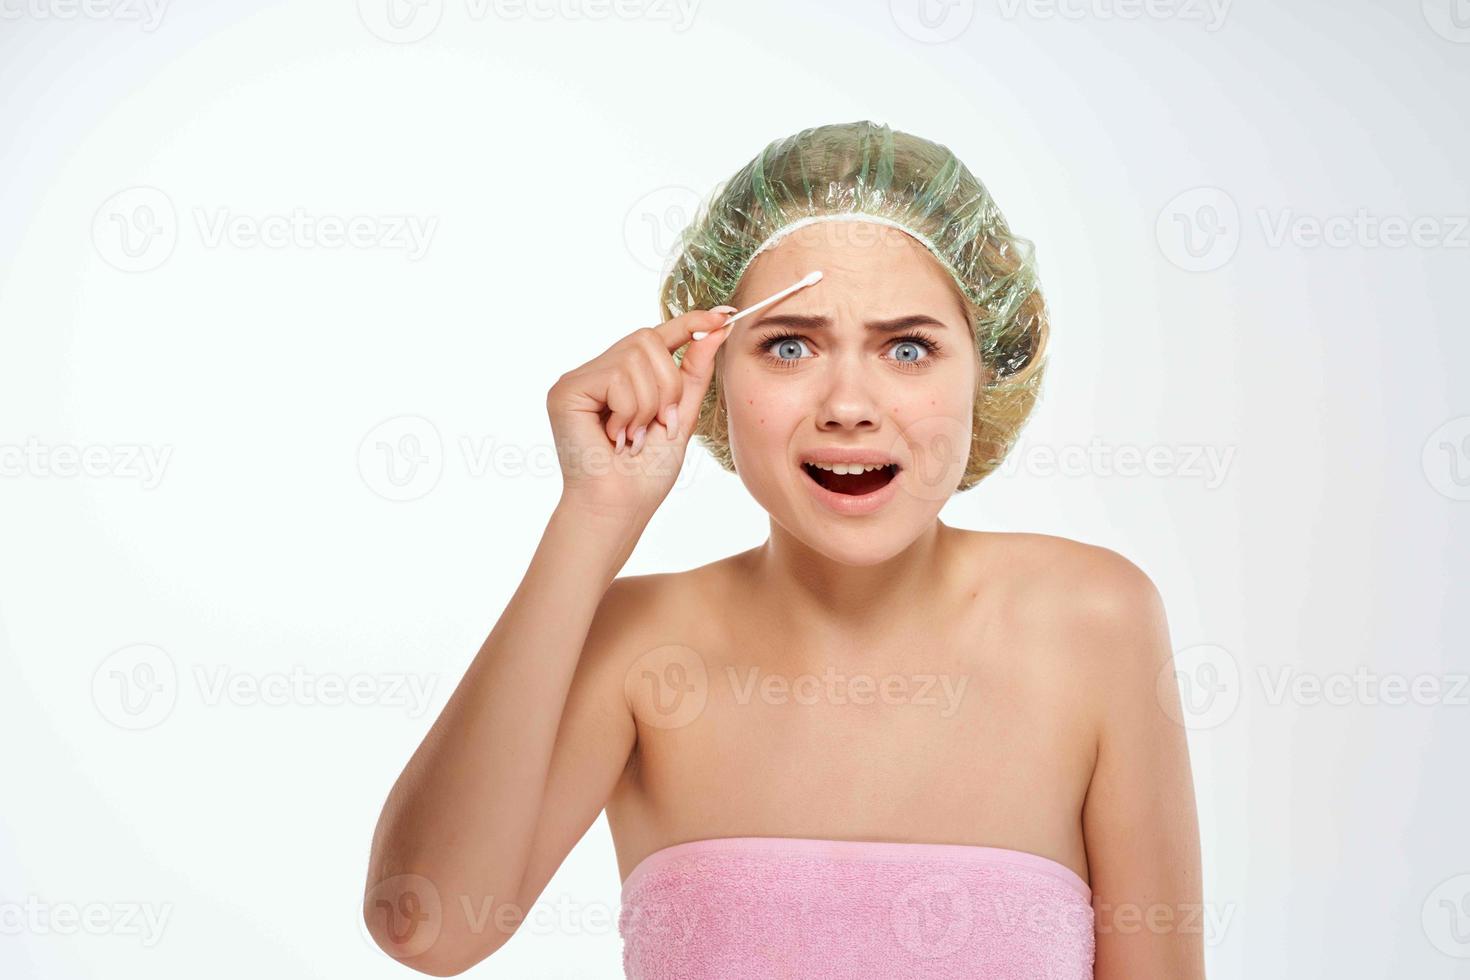 woman with bare shoulders cotton swab facial dermatology photo